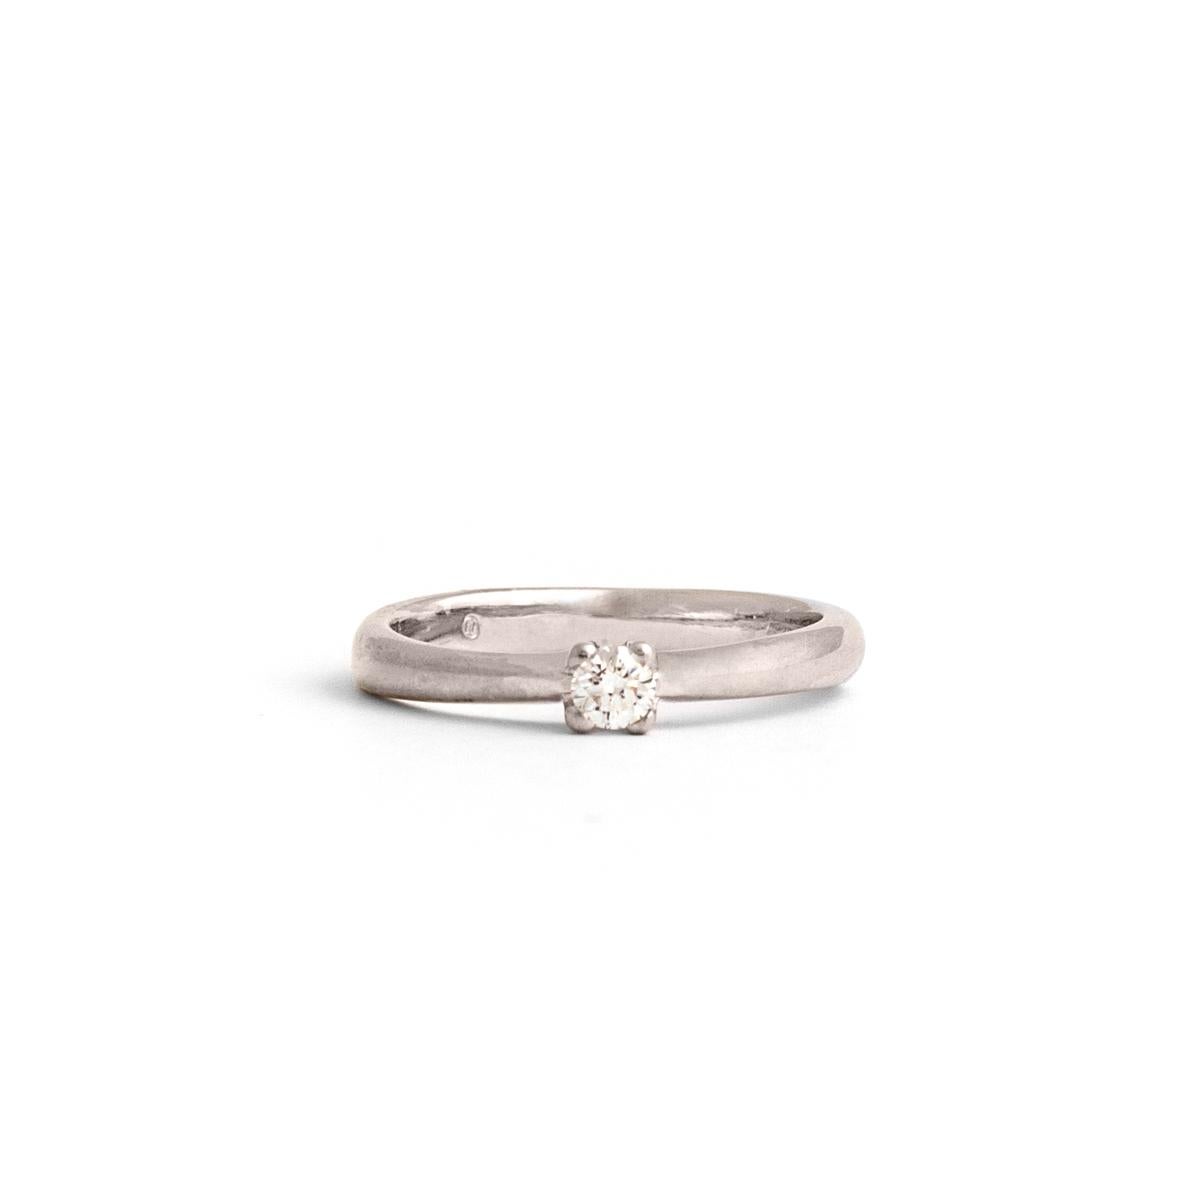 Solitaire Diamond on white gold 18k Ring.
Diamond estimated weight: 0.10 carat.
Modern cut. Estimated to be G color and Vs clarity.
Diamond diameter: Approximately 2.97 millimeters.
Ring Size: 5.
Gross weight: 3.02 grams.